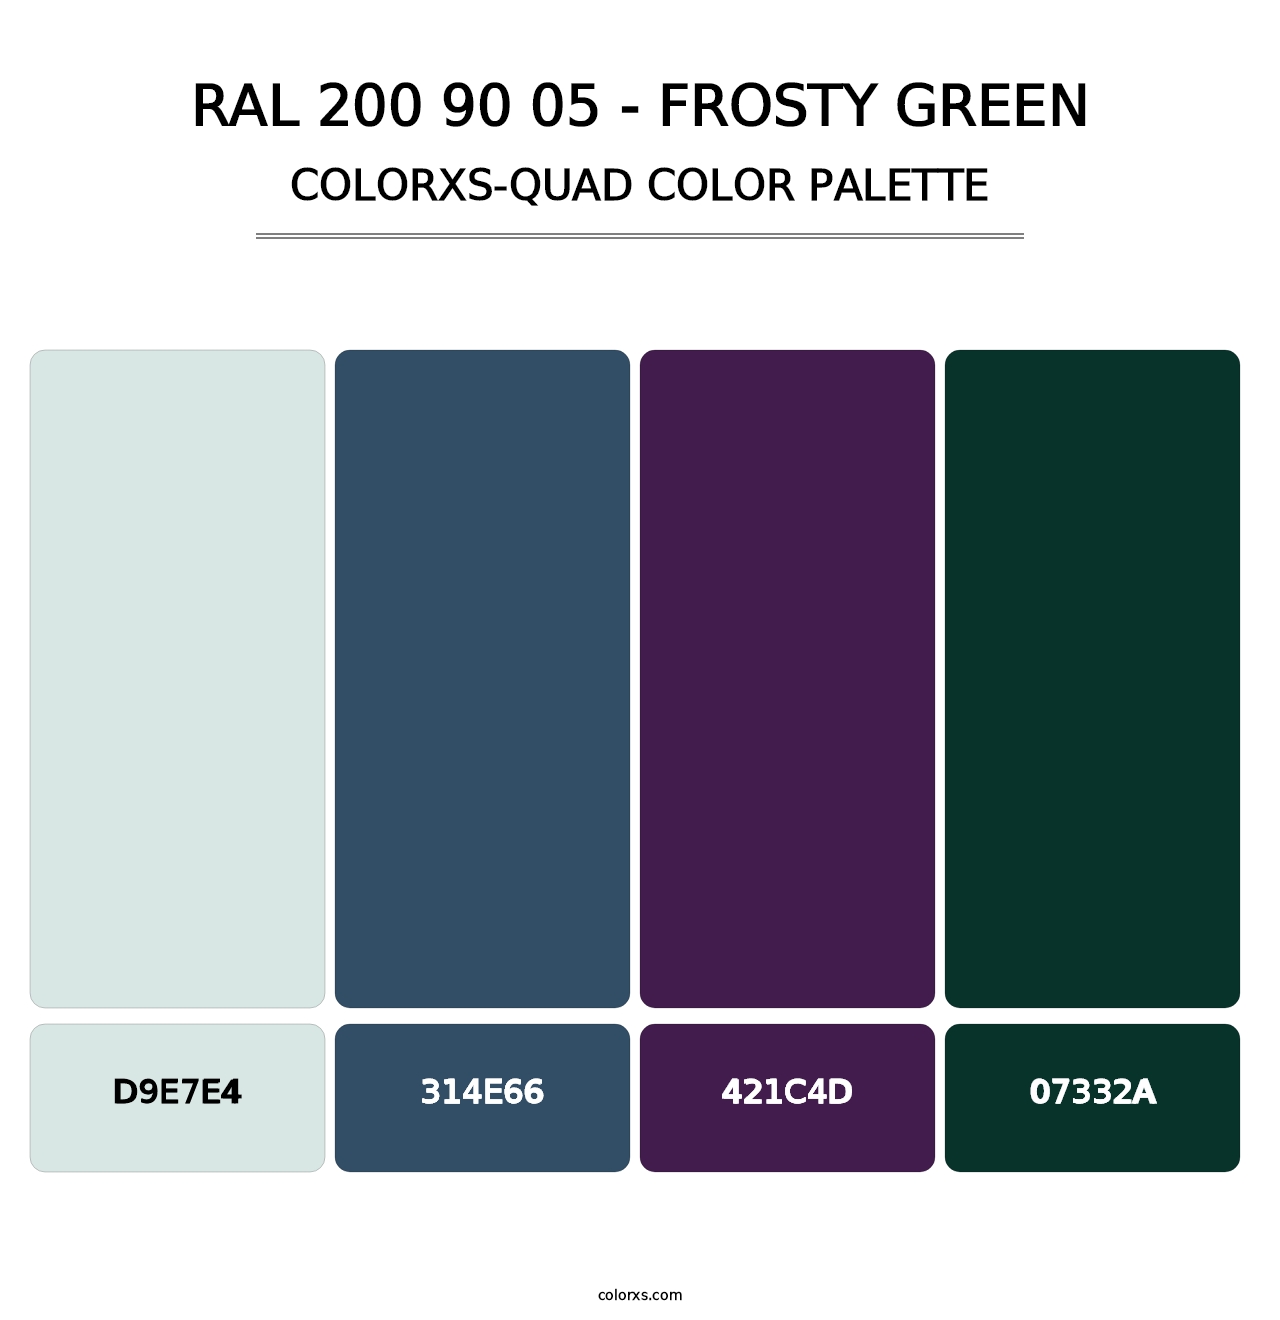 RAL 200 90 05 - Frosty Green - Colorxs Quad Palette